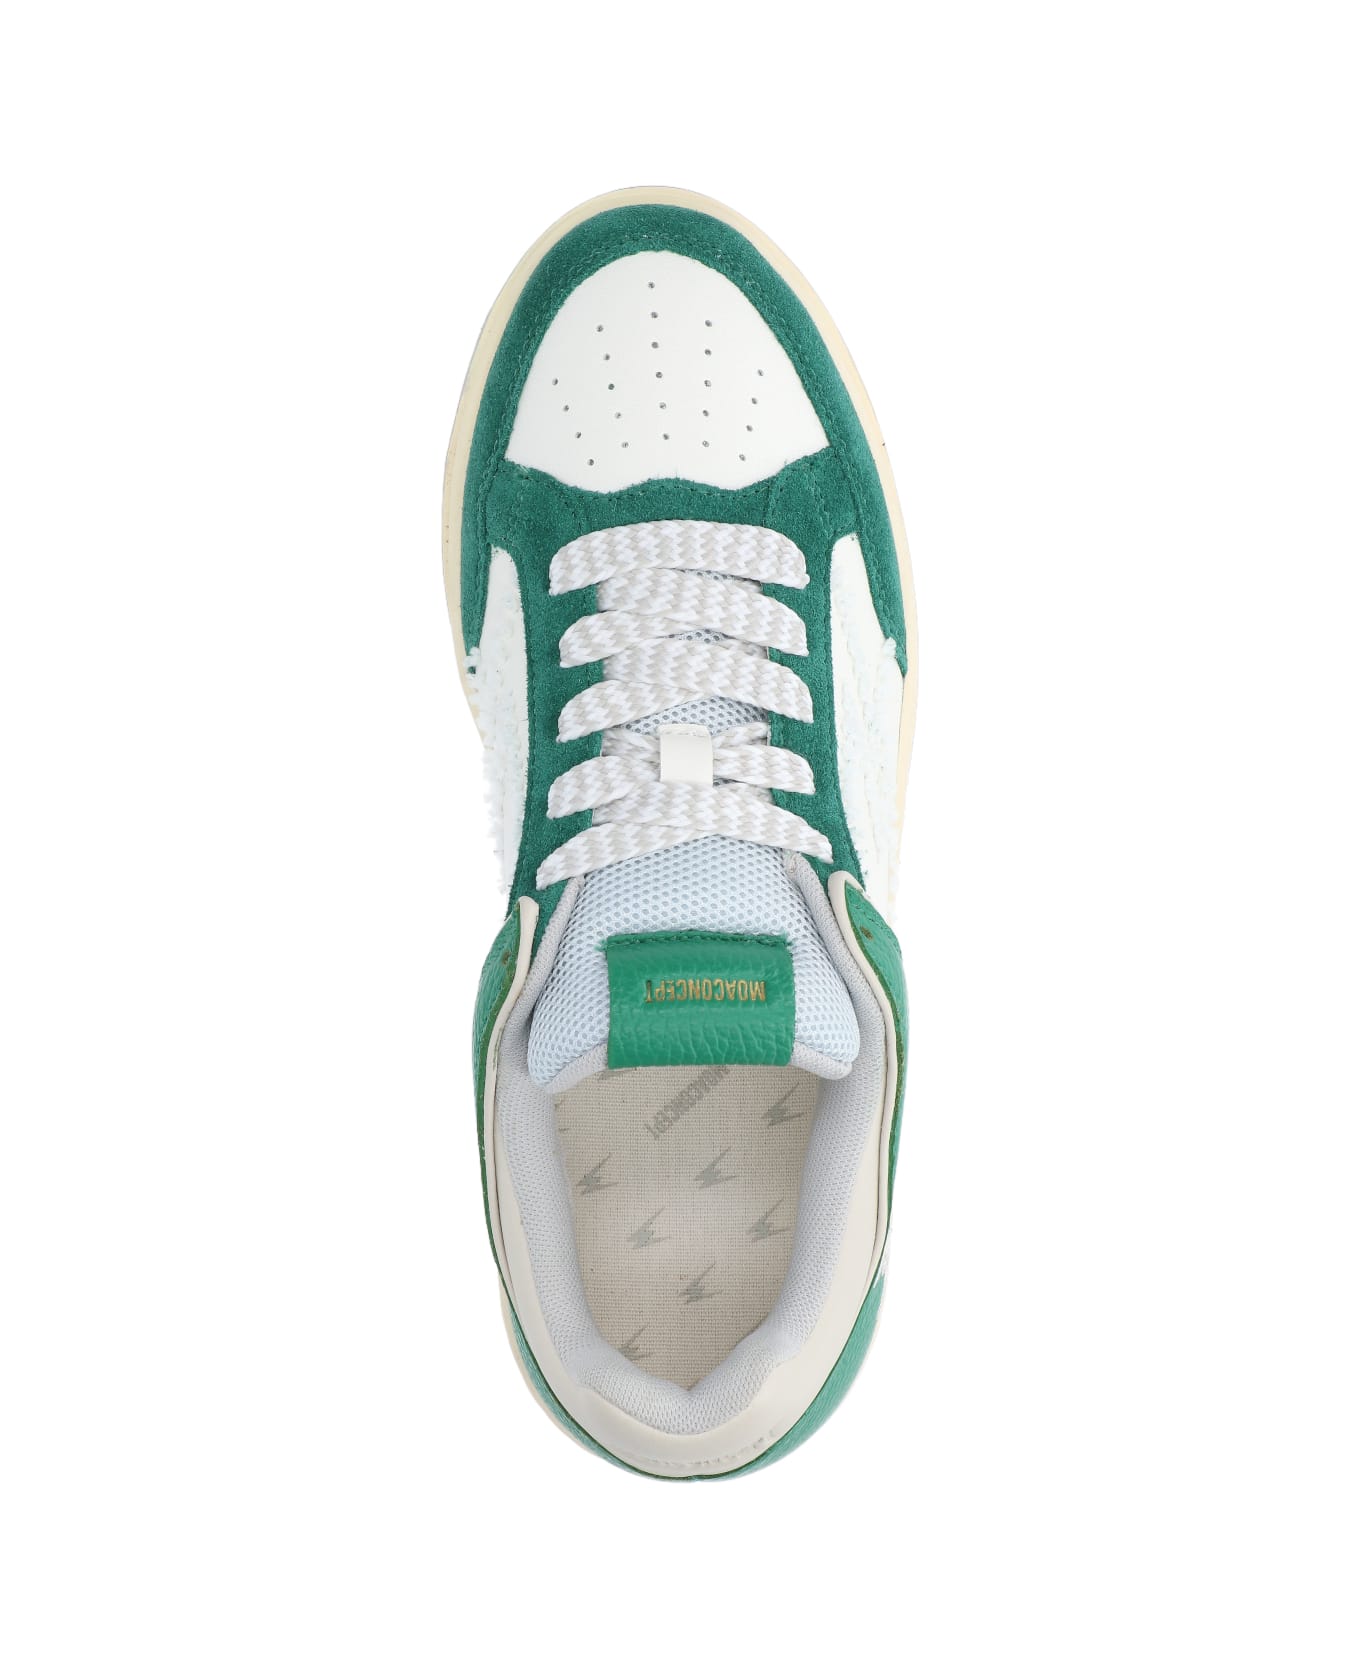 M.O.A. master of arts 'squad' Sneakers - Green